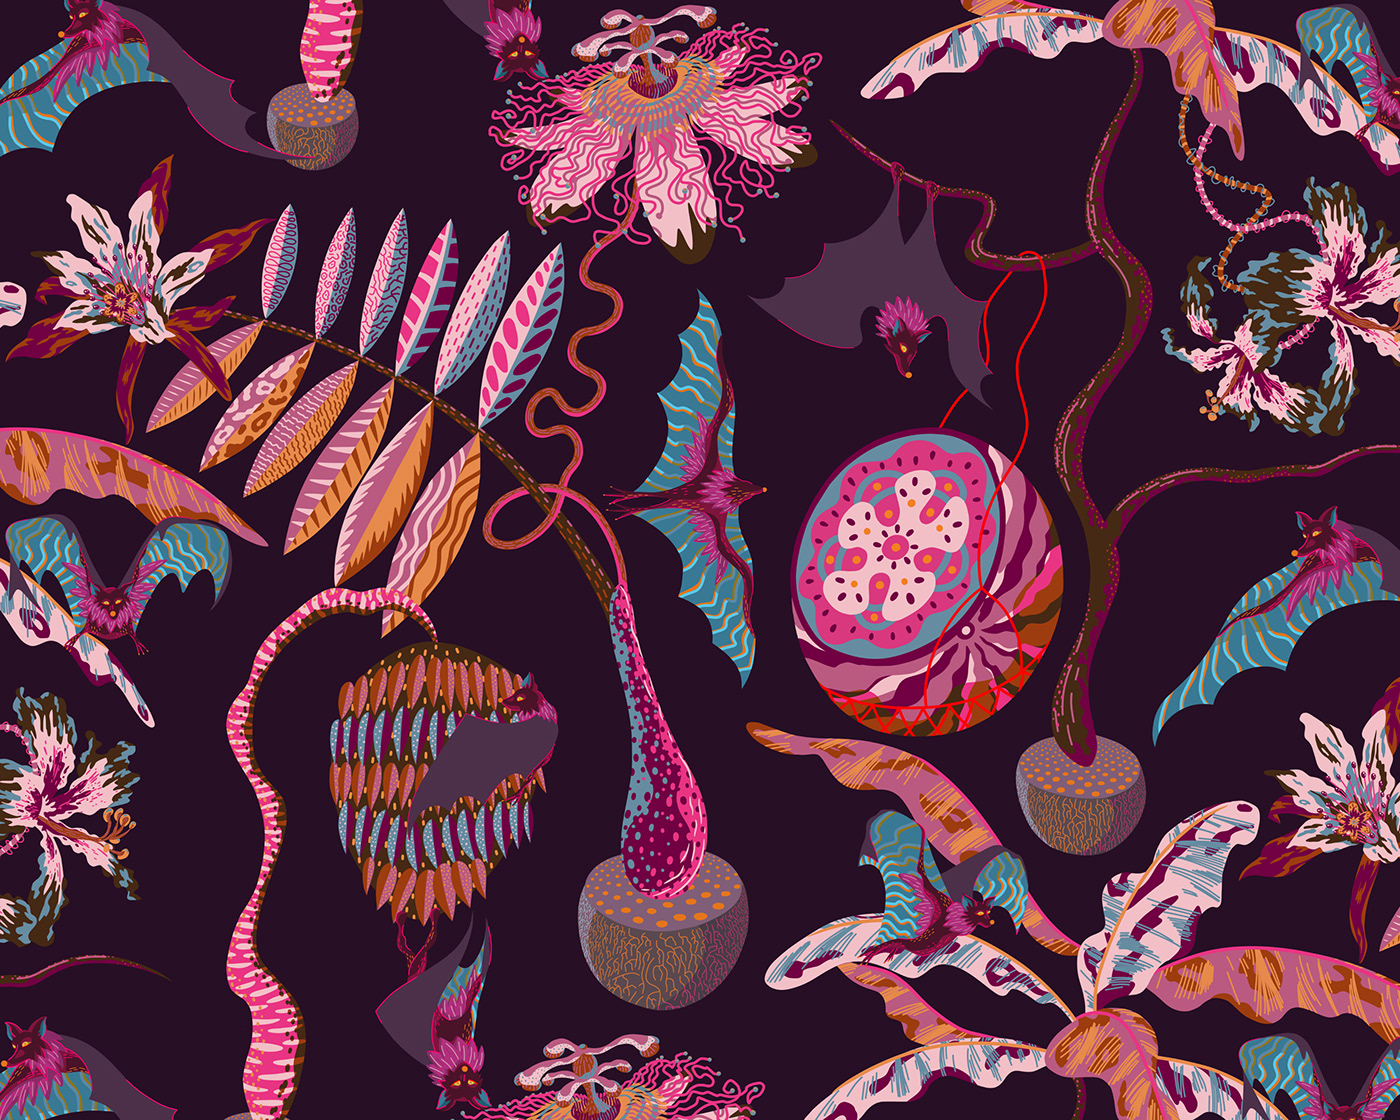 Autumnal colourway of the 'Midnight Feast' pattern depicting bats in a lively jungle world.